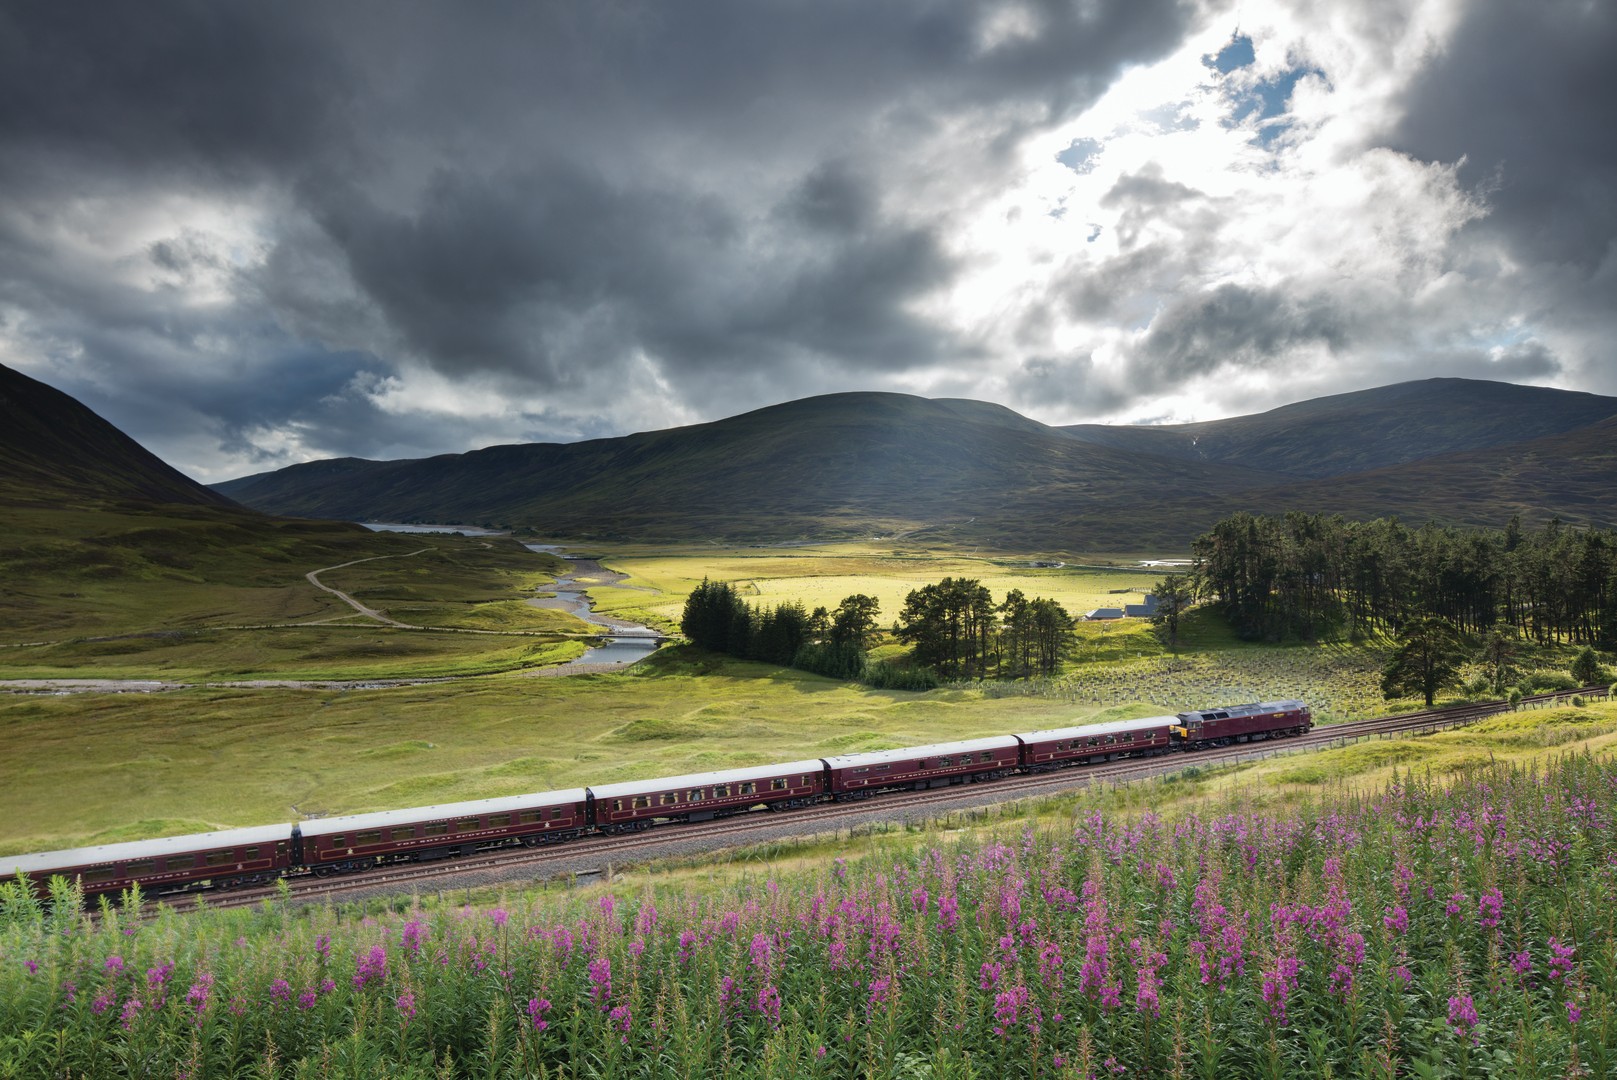 Travel back in time through the Scottish Highlands